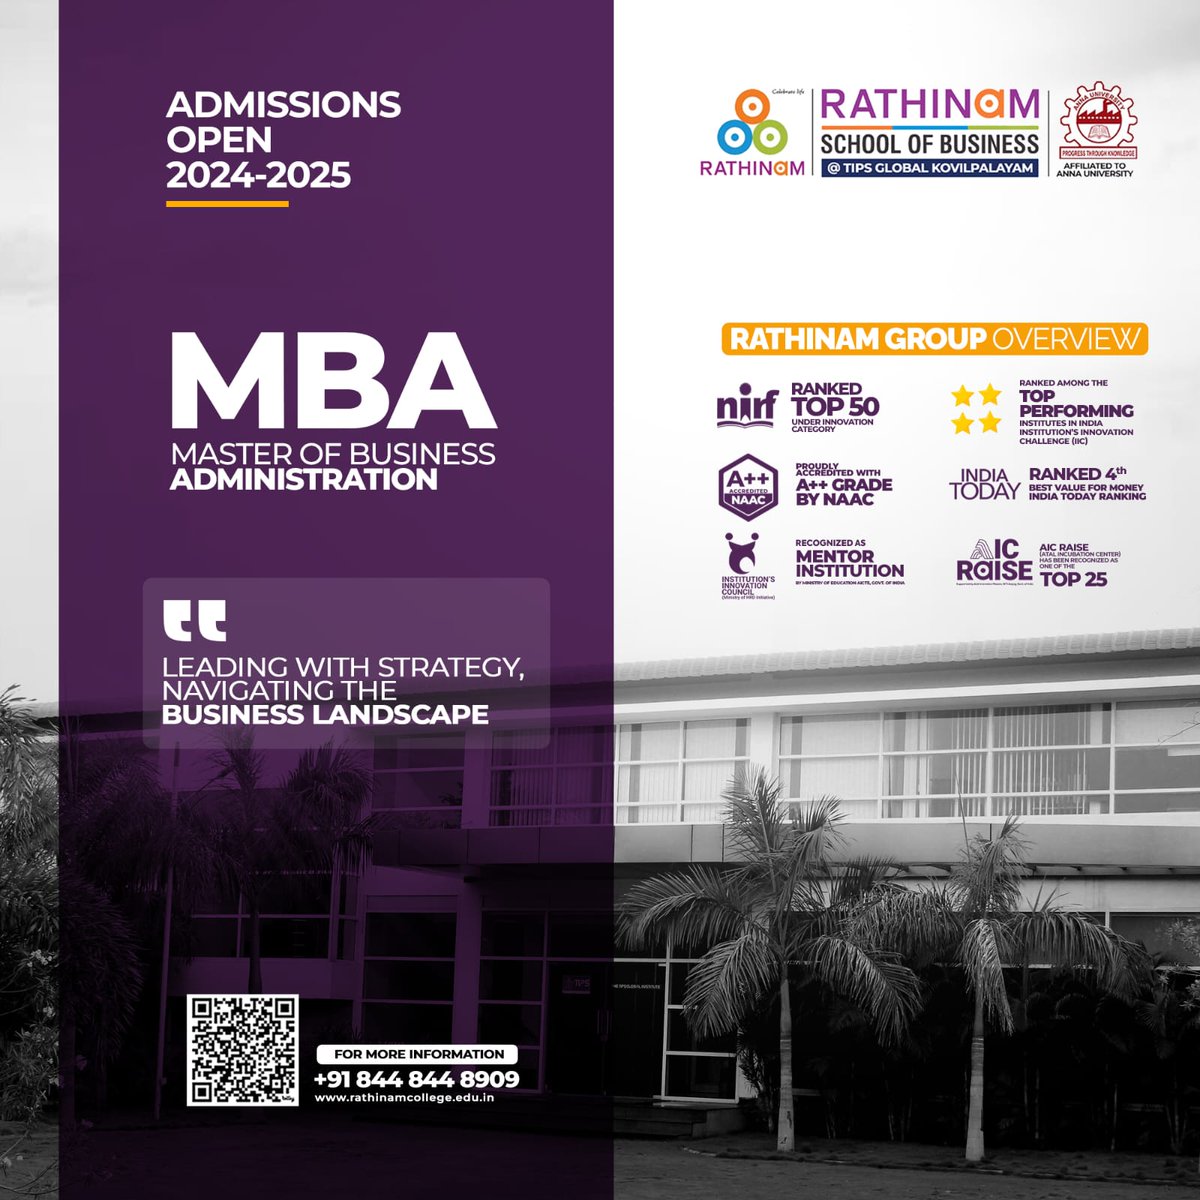 Empower Your Future with an MBA at Rathinam School of Business! Admissions are now open for the 2024-2025 academic year. 

#bestcollegeincoimbatore #MBA #RathinamSchoolOfBusiness #Leadership #BusinessEducation #TopRanked #Coimbatore #India